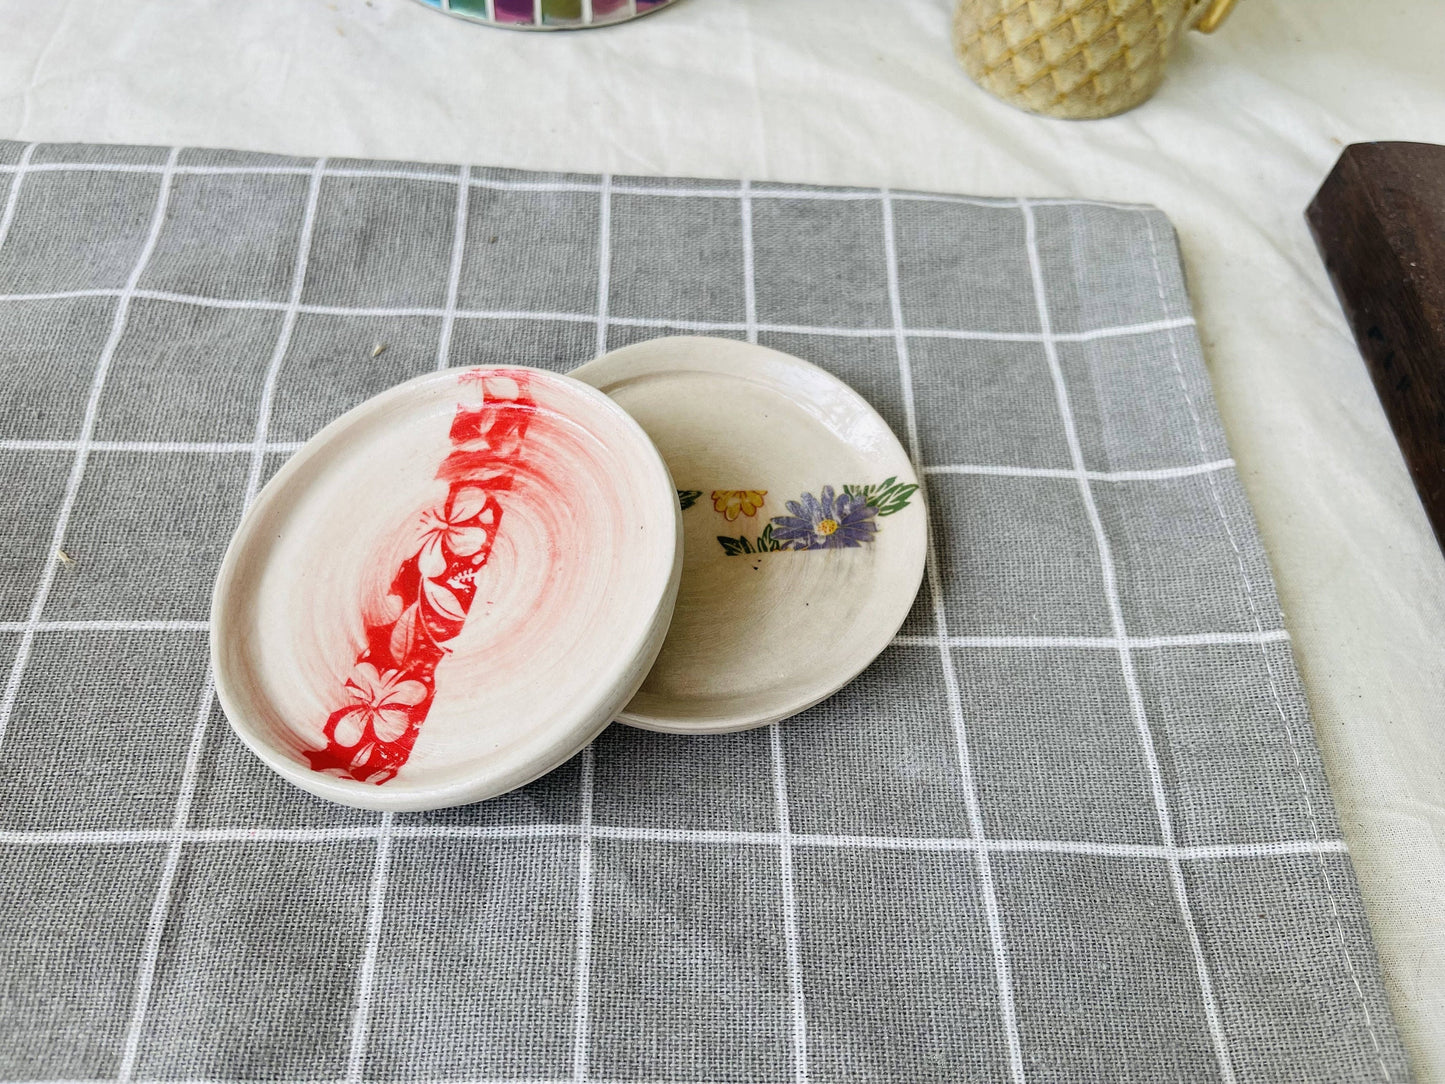 Retro Ceramic Flower Teacup Mat, Personalized Coffee Coaster, Cup Of Coffee Drink Mat